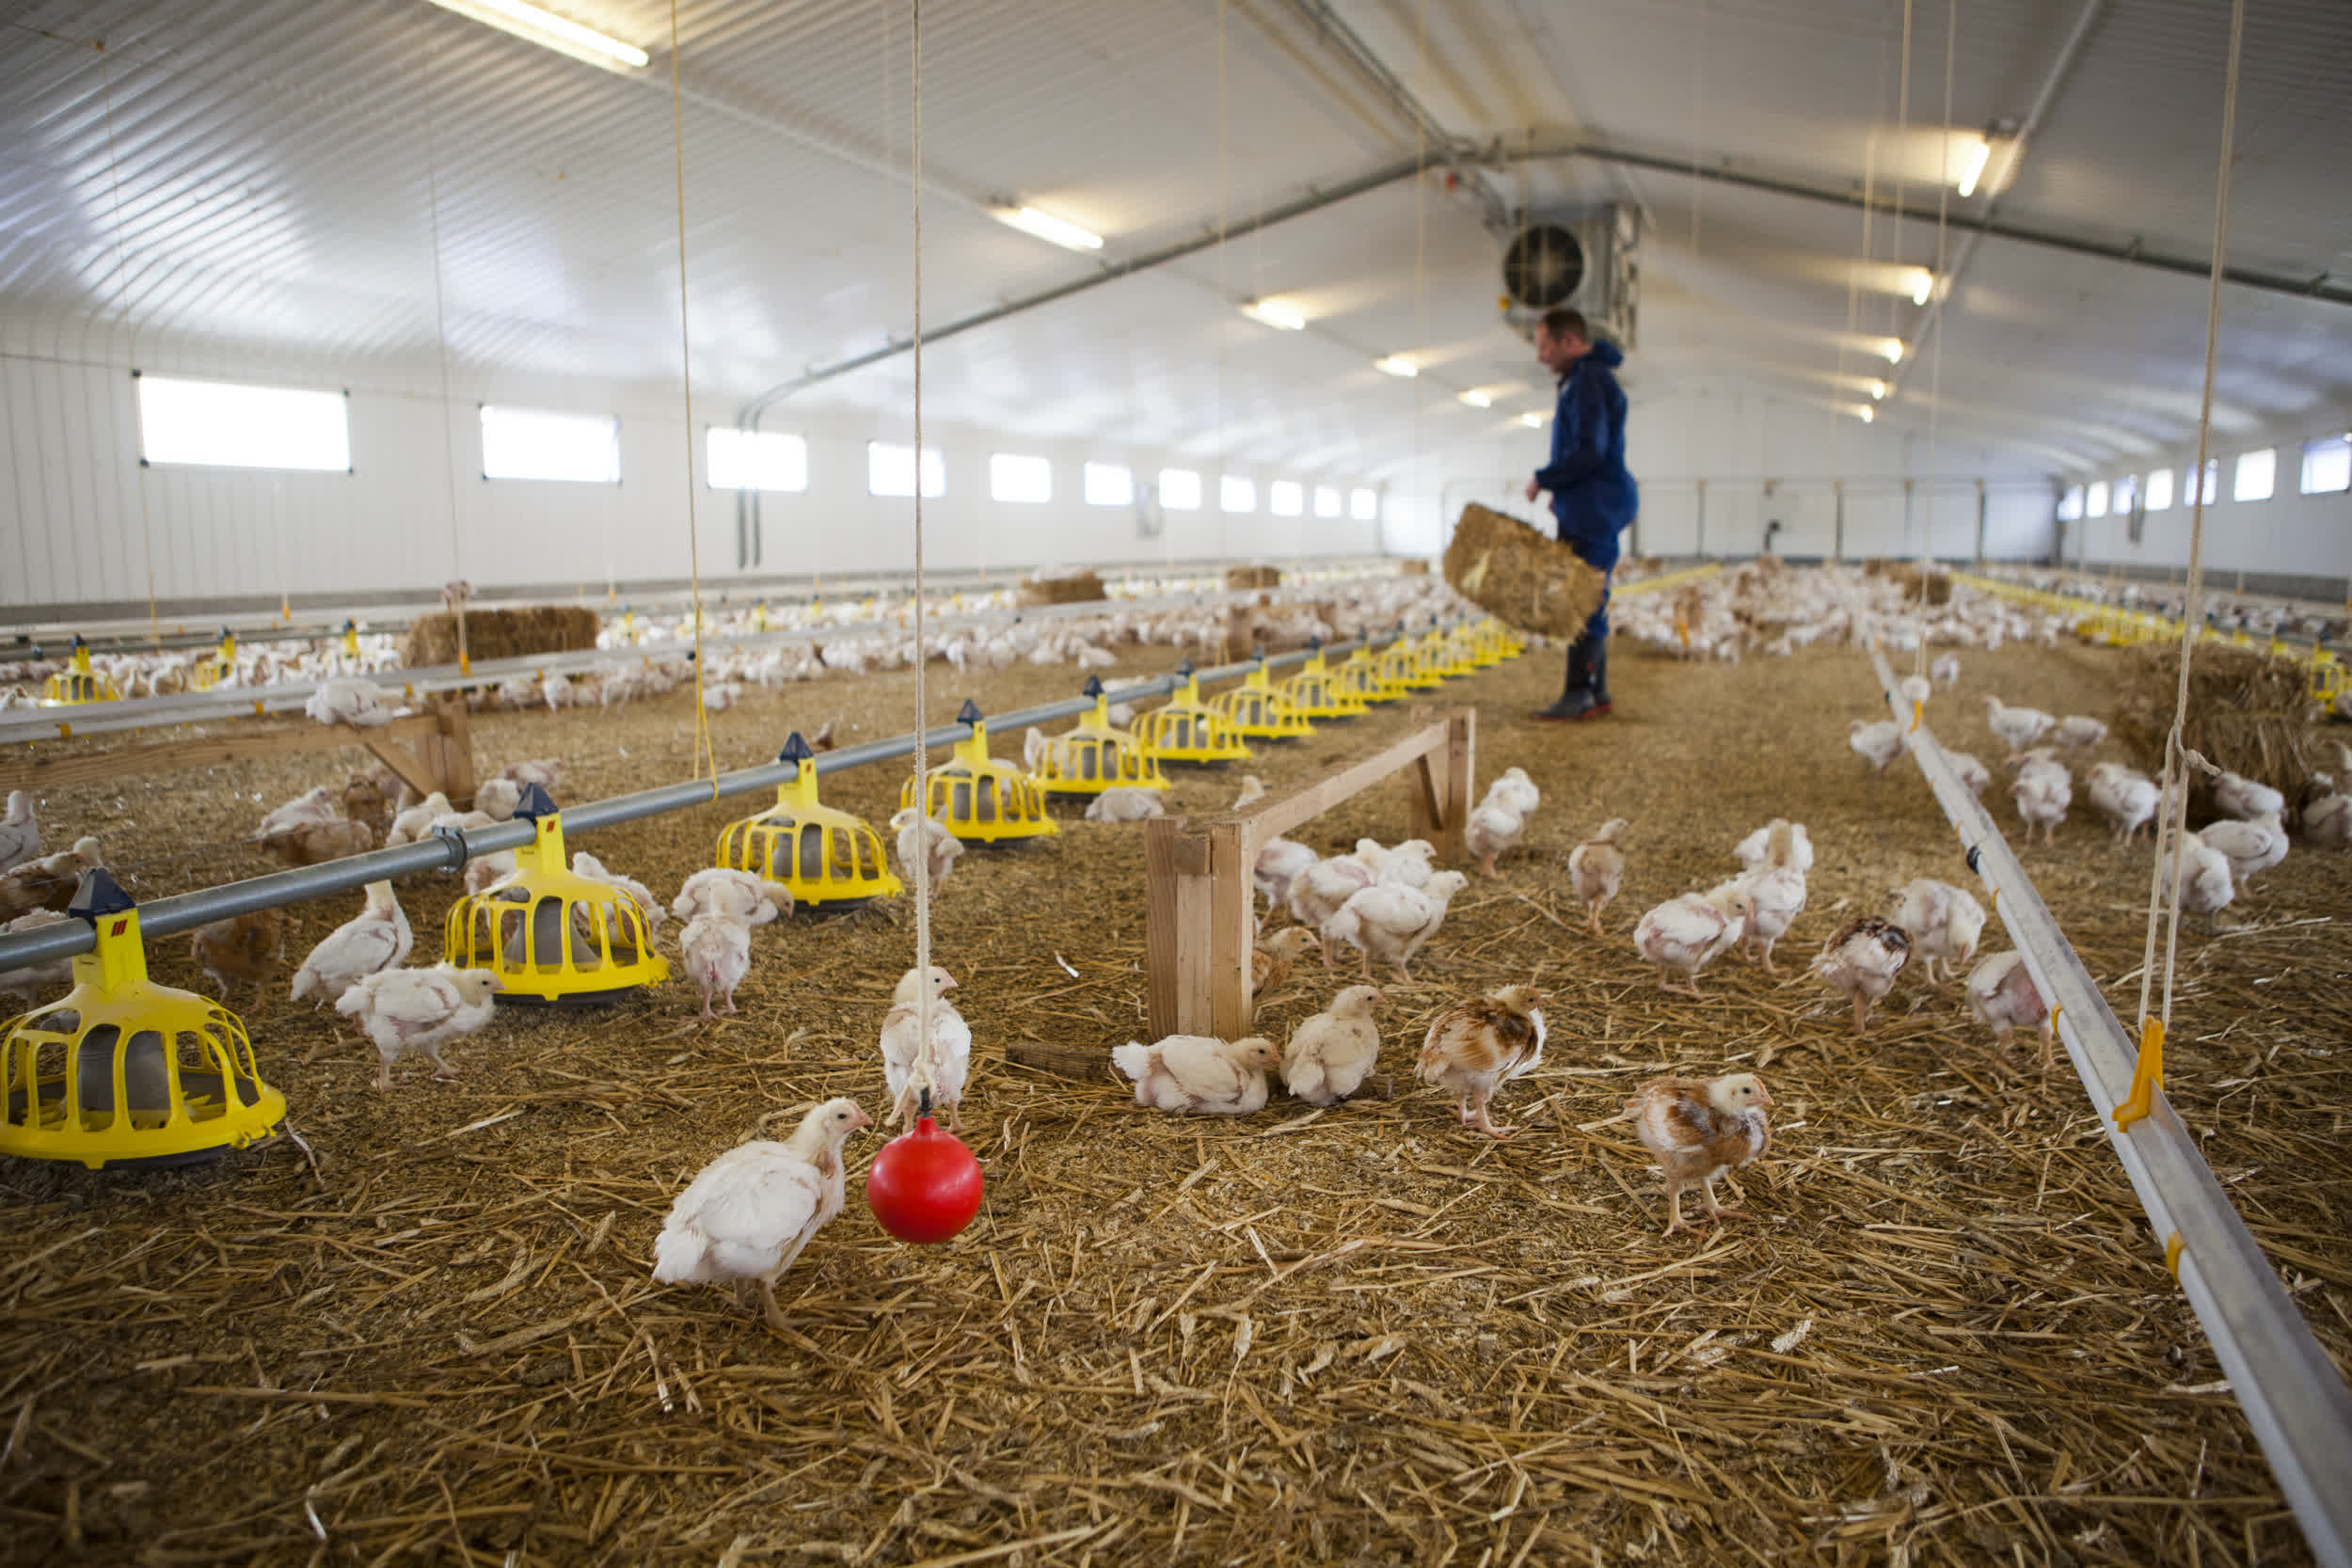 Chickens in a barn on a certified chicken farm in Somerset, UK